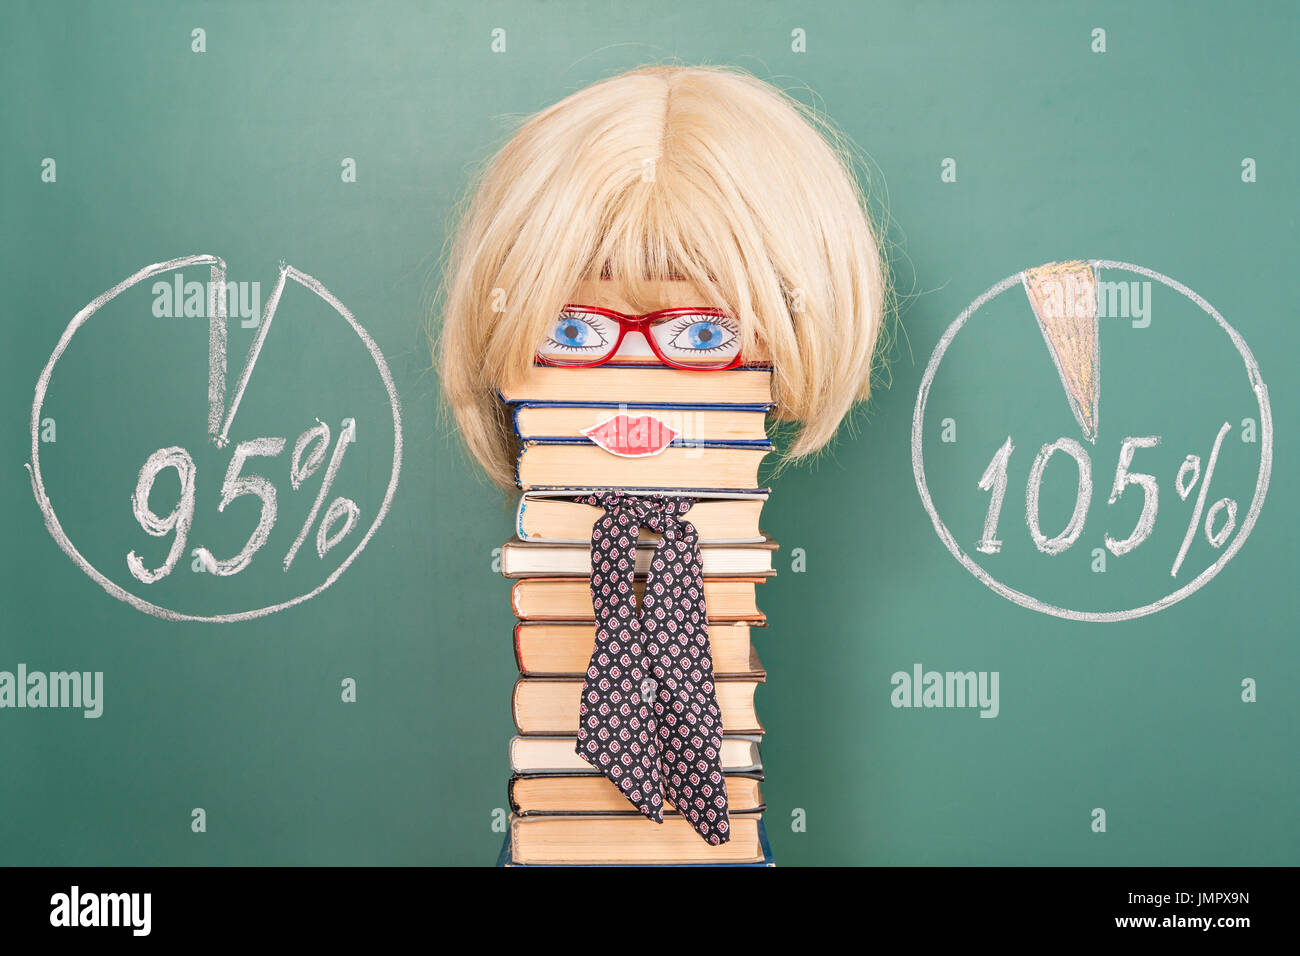 Funny education idea. Woman teacher in front of blackboard with percentage diagram Stock Photo